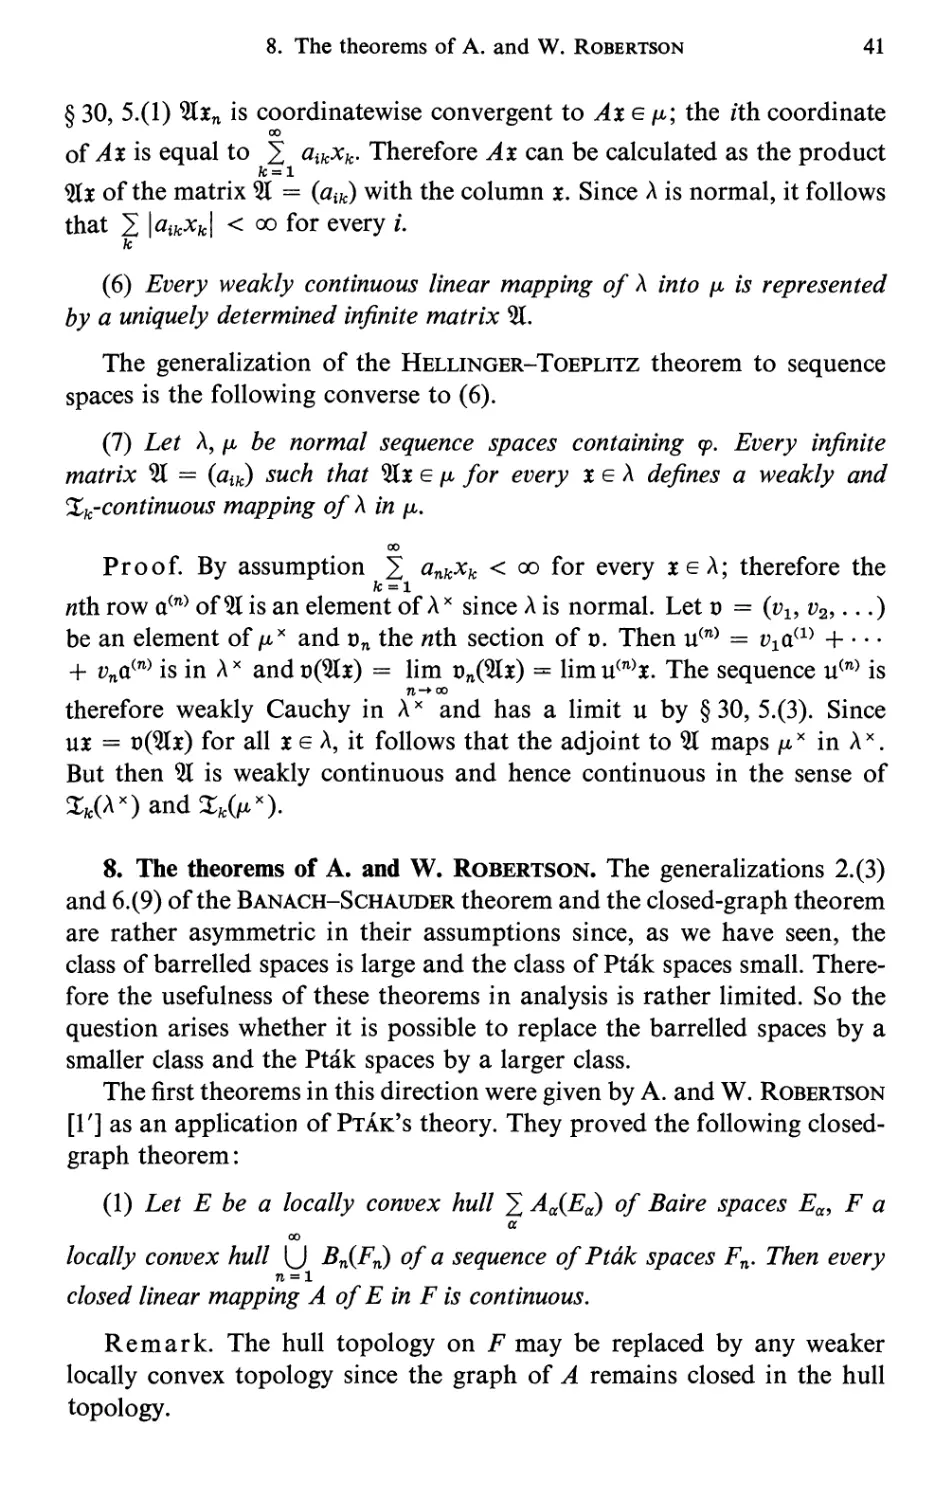 8. The theorems of A. and W. Robertson